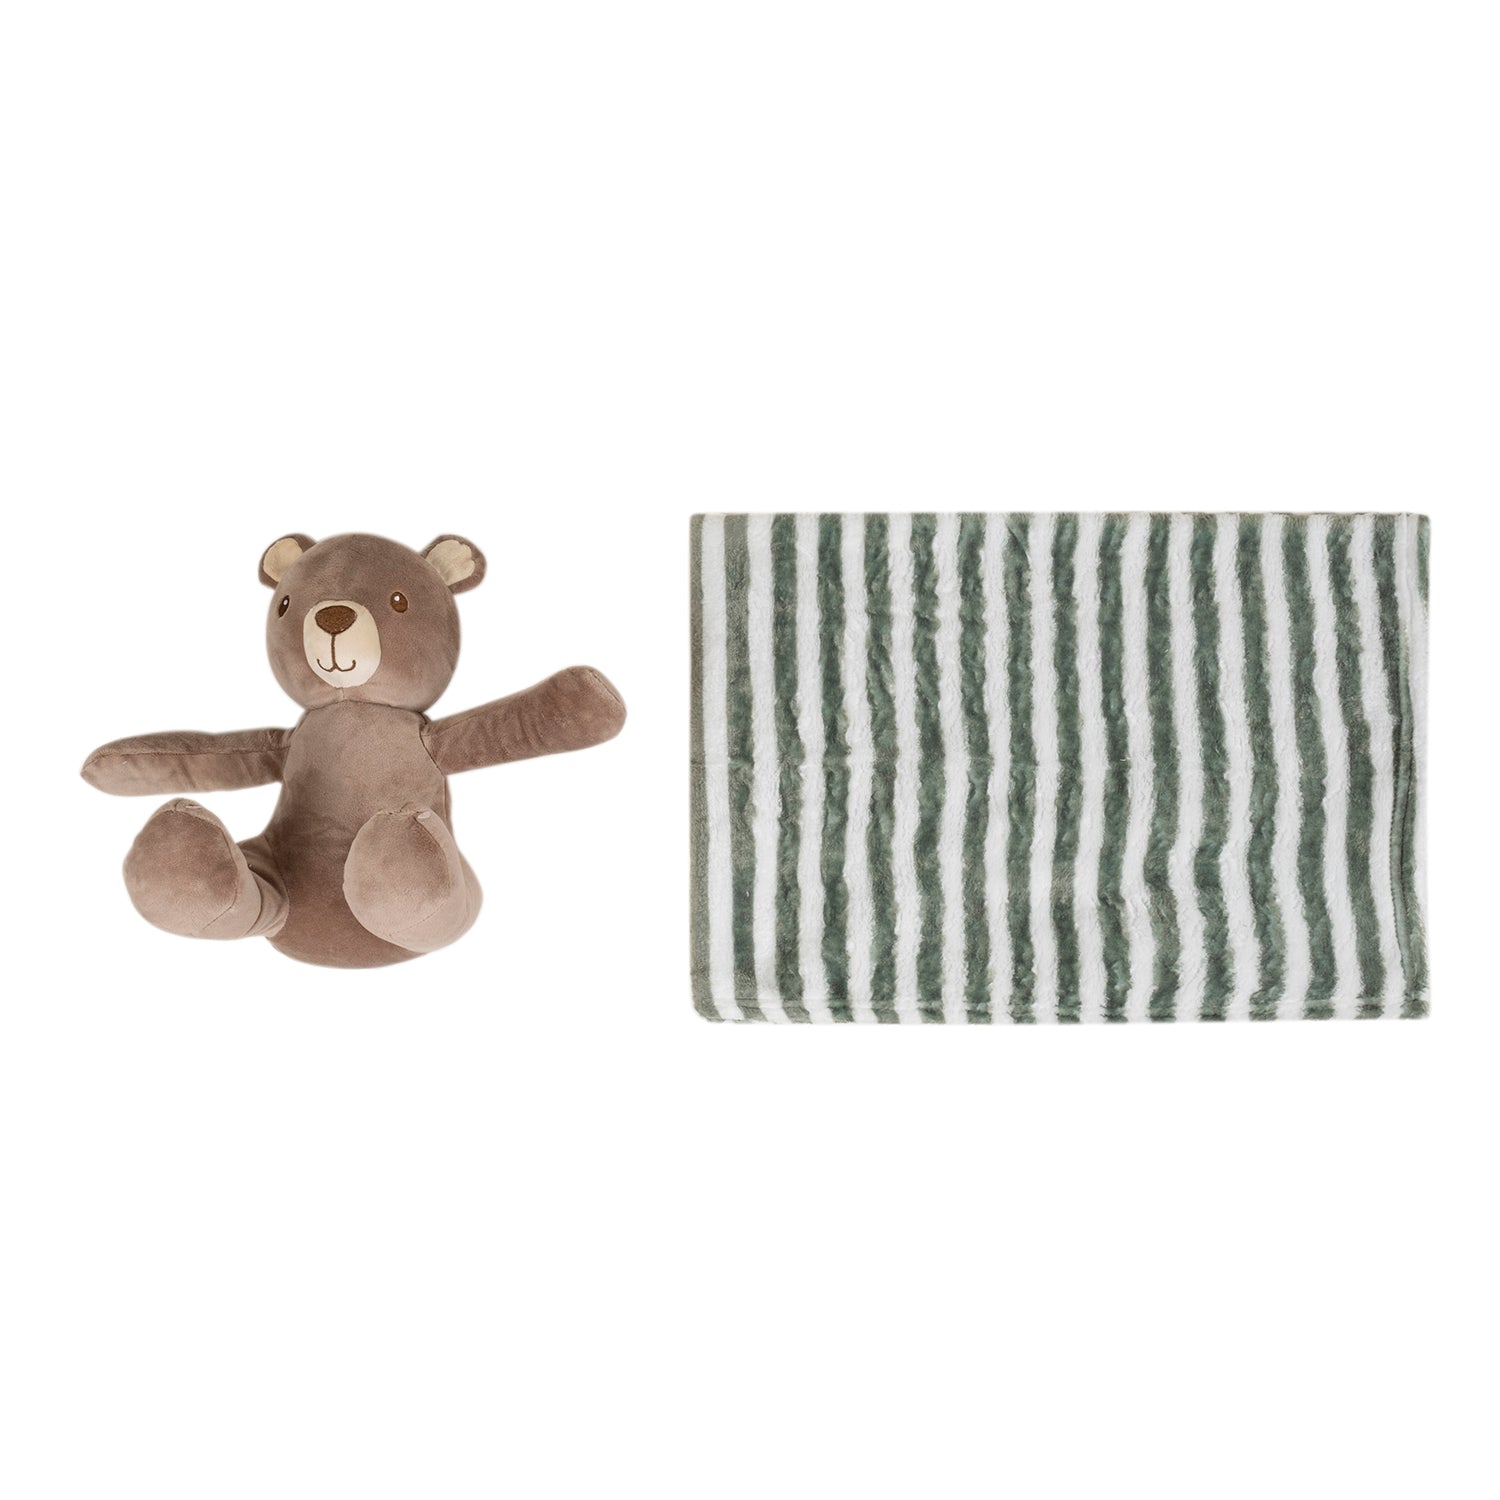 Baby Moo Bear Snuggle Buddy Soft Rattle and Plush Blanket Gift Toy Blanket - Brown